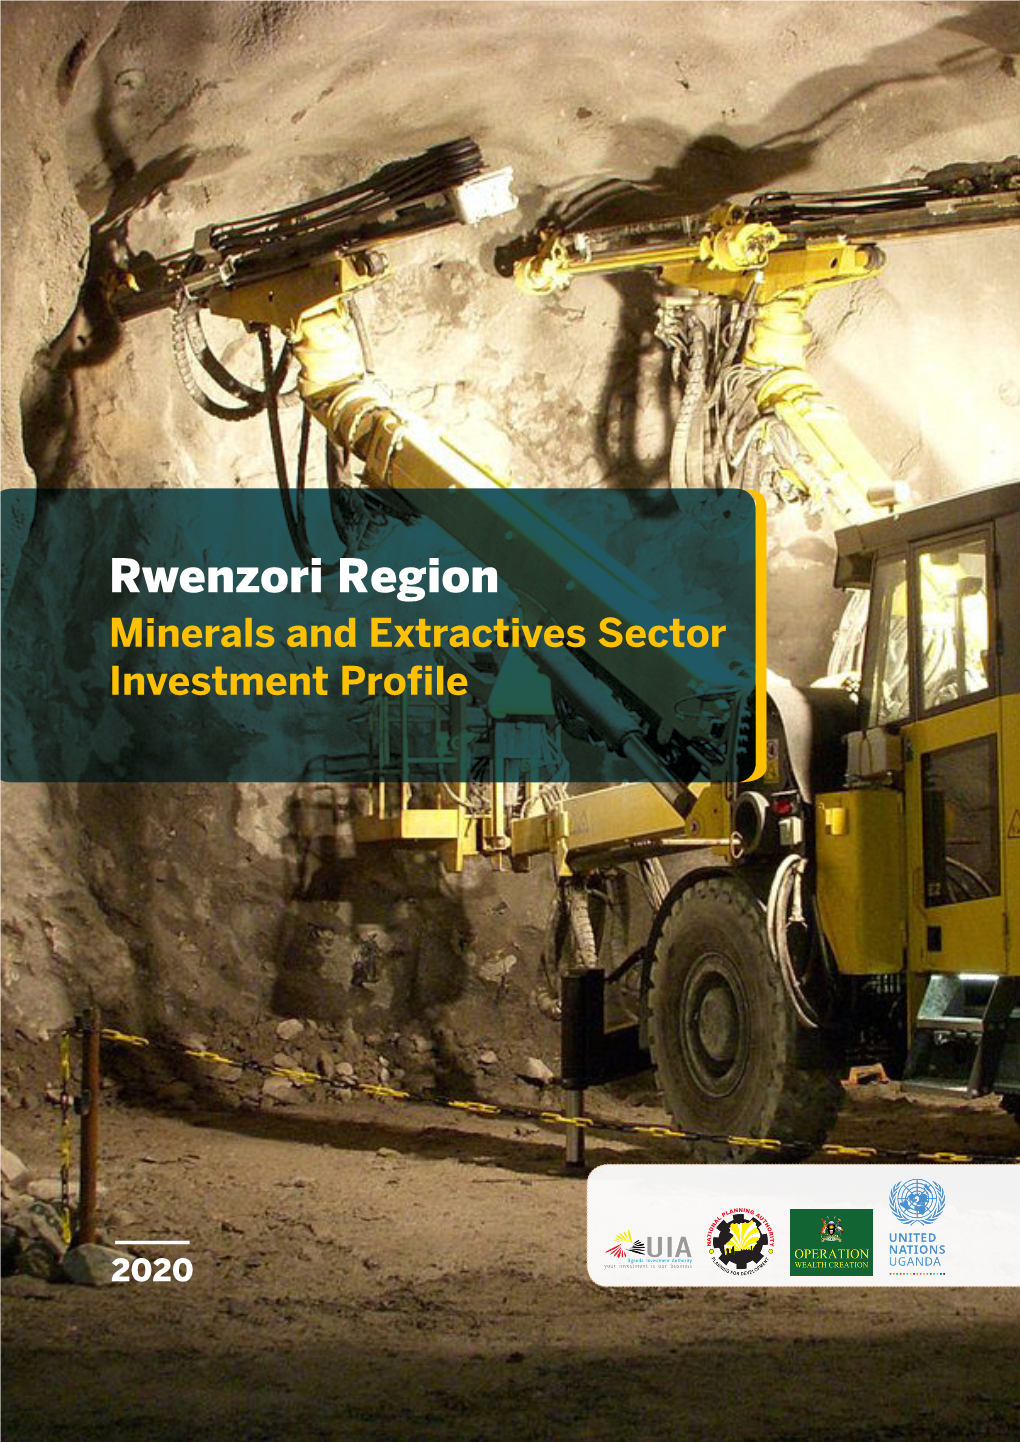 Rwenzori Region Minerals and Extractives Sector Investment Profile